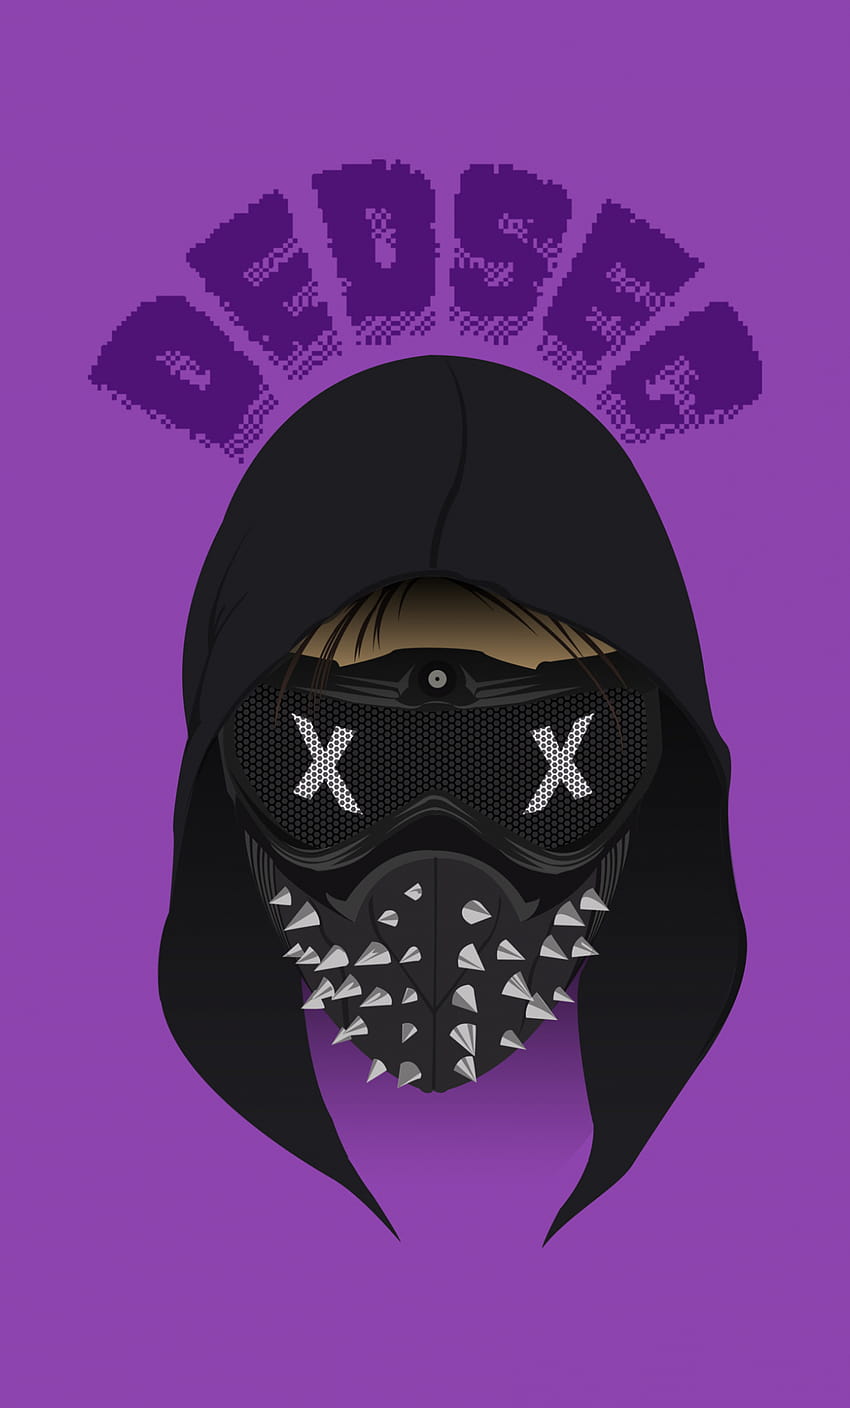 1280x2120 dedsec, watch dogs 2, minimal, purple, video game, iphone 6 plus, 1280x2120 , background, 3400, iphone dedsec HD phone wallpaper